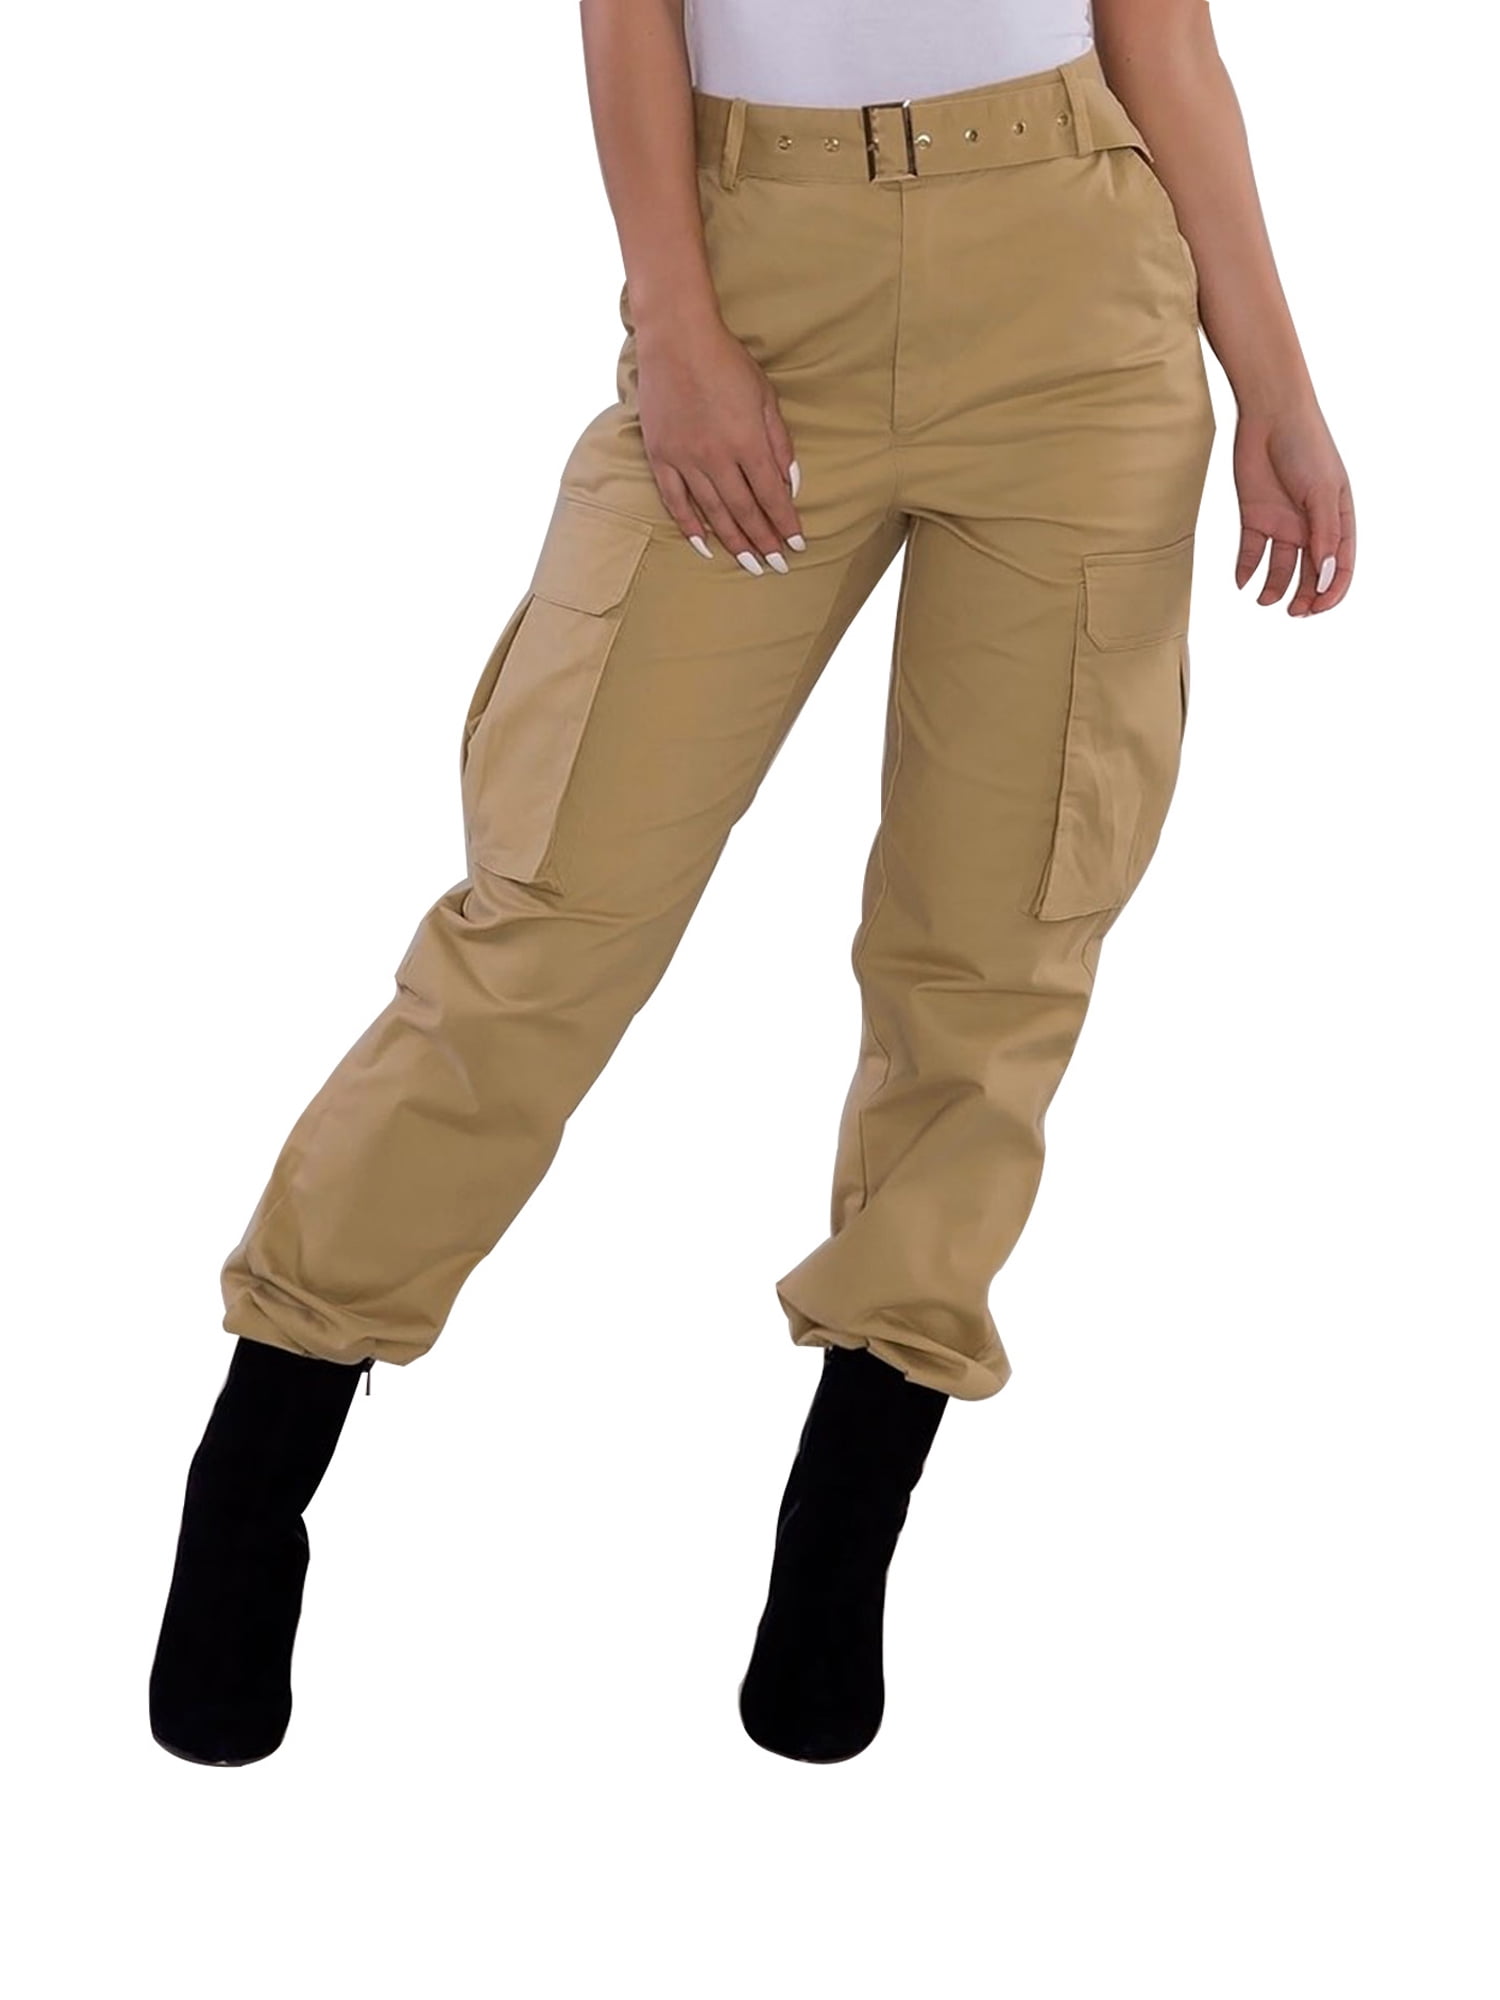 Ladies Womens Army Pockets Military Casual loose Cargo Outdoor Pants Trousers